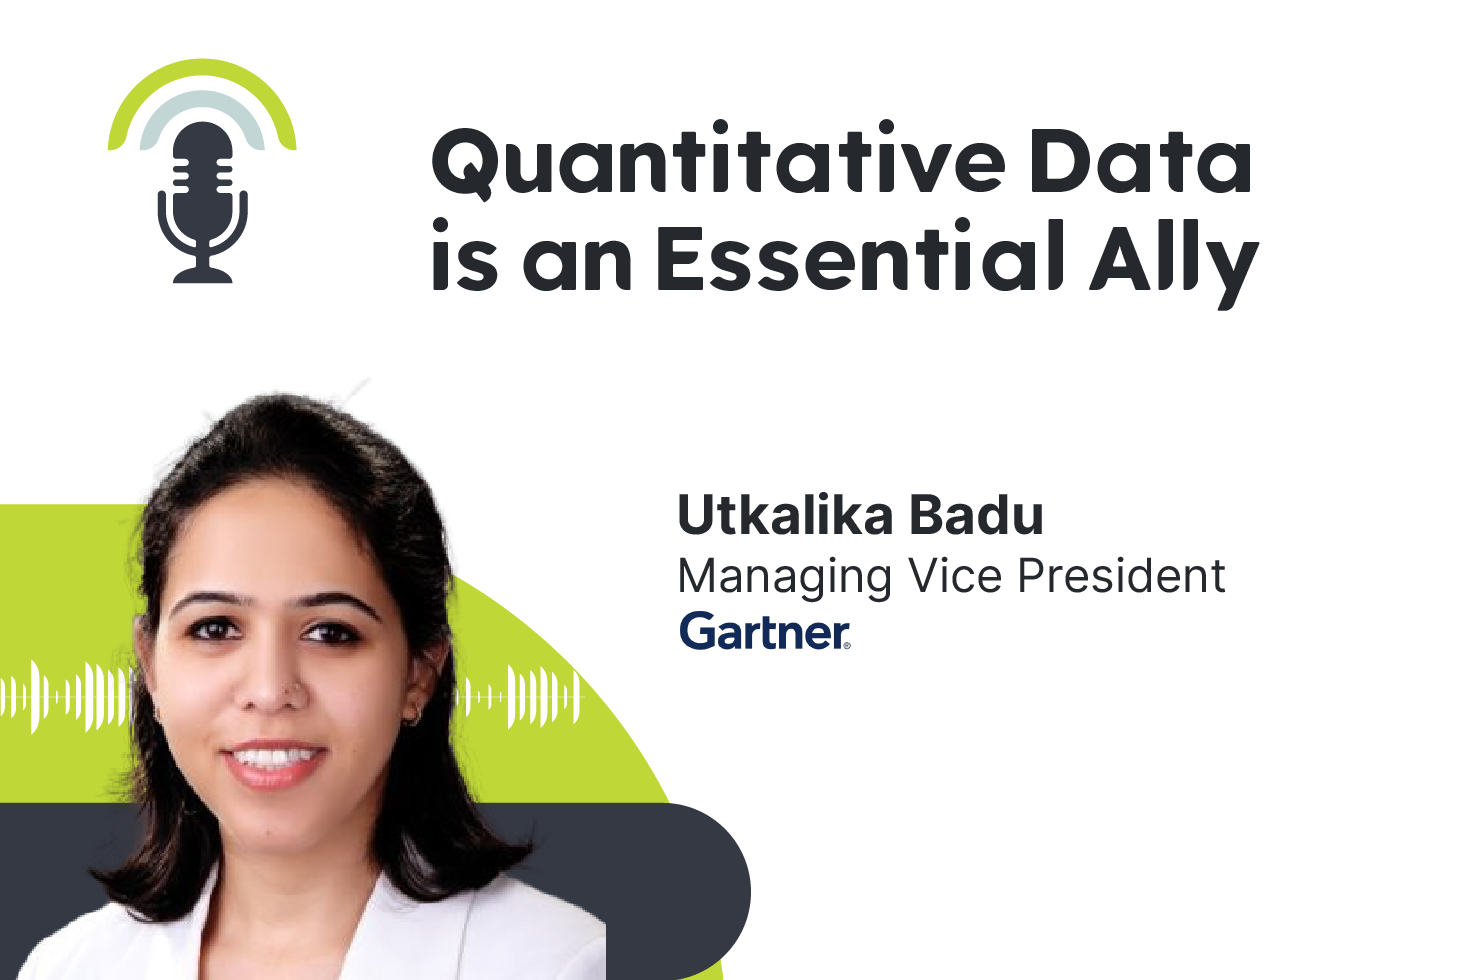 Making Your Business Case: Quantitative Data is an Essential Ally